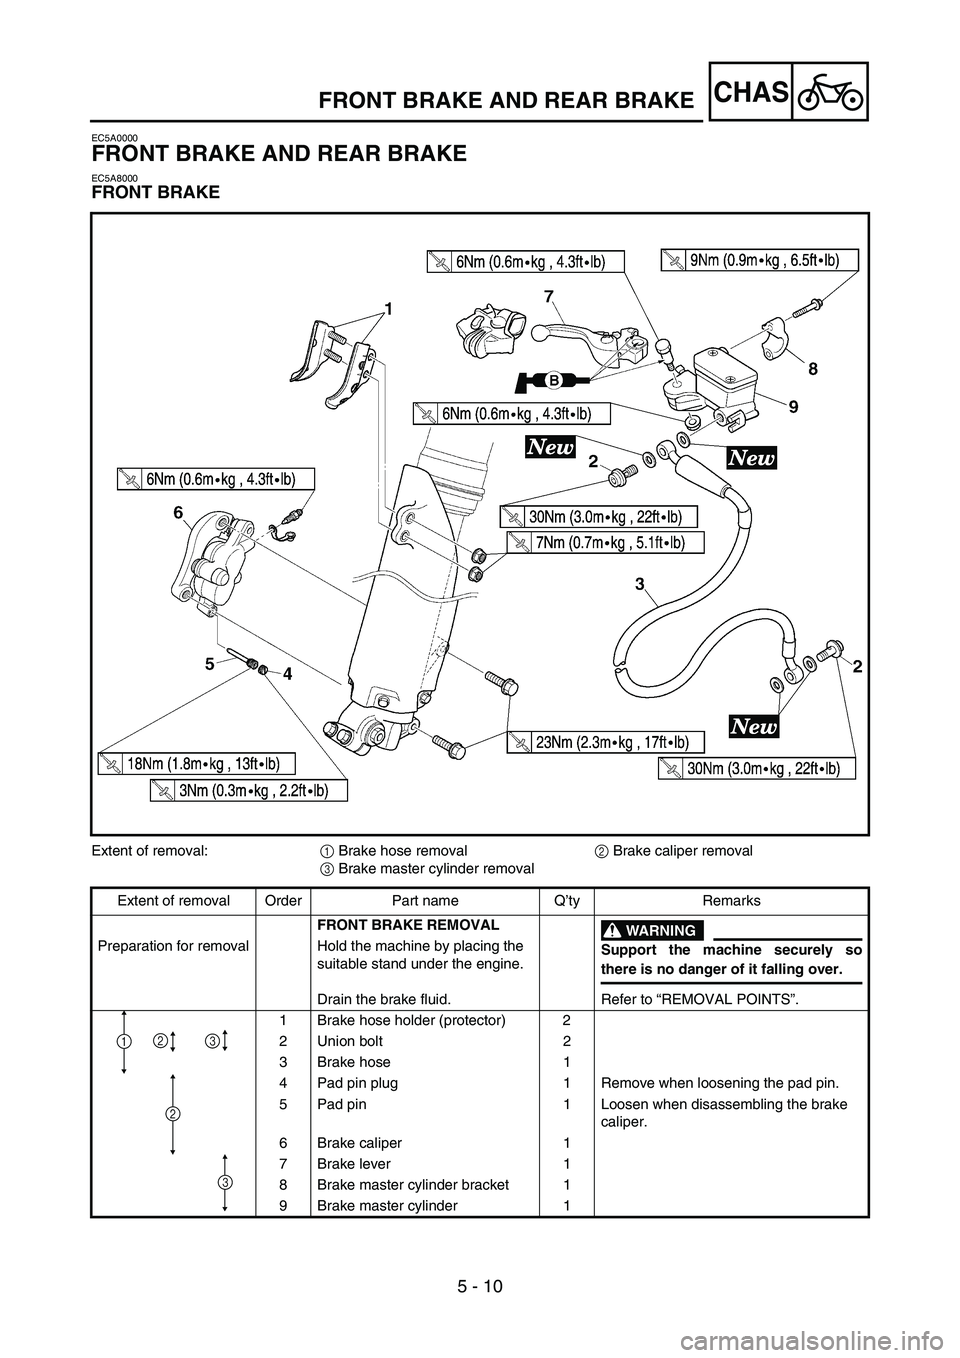 YAMAHA YZ250F 2007 User Guide 5 - 10
CHASFRONT BRAKE AND REAR BRAKE
EC5A0000
FRONT BRAKE AND REAR BRAKE
EC5A8000
FRONT BRAKE
Extent of removal:
1 Brake hose removal
2 Brake caliper removal
3 Brake master cylinder removal
Extent of